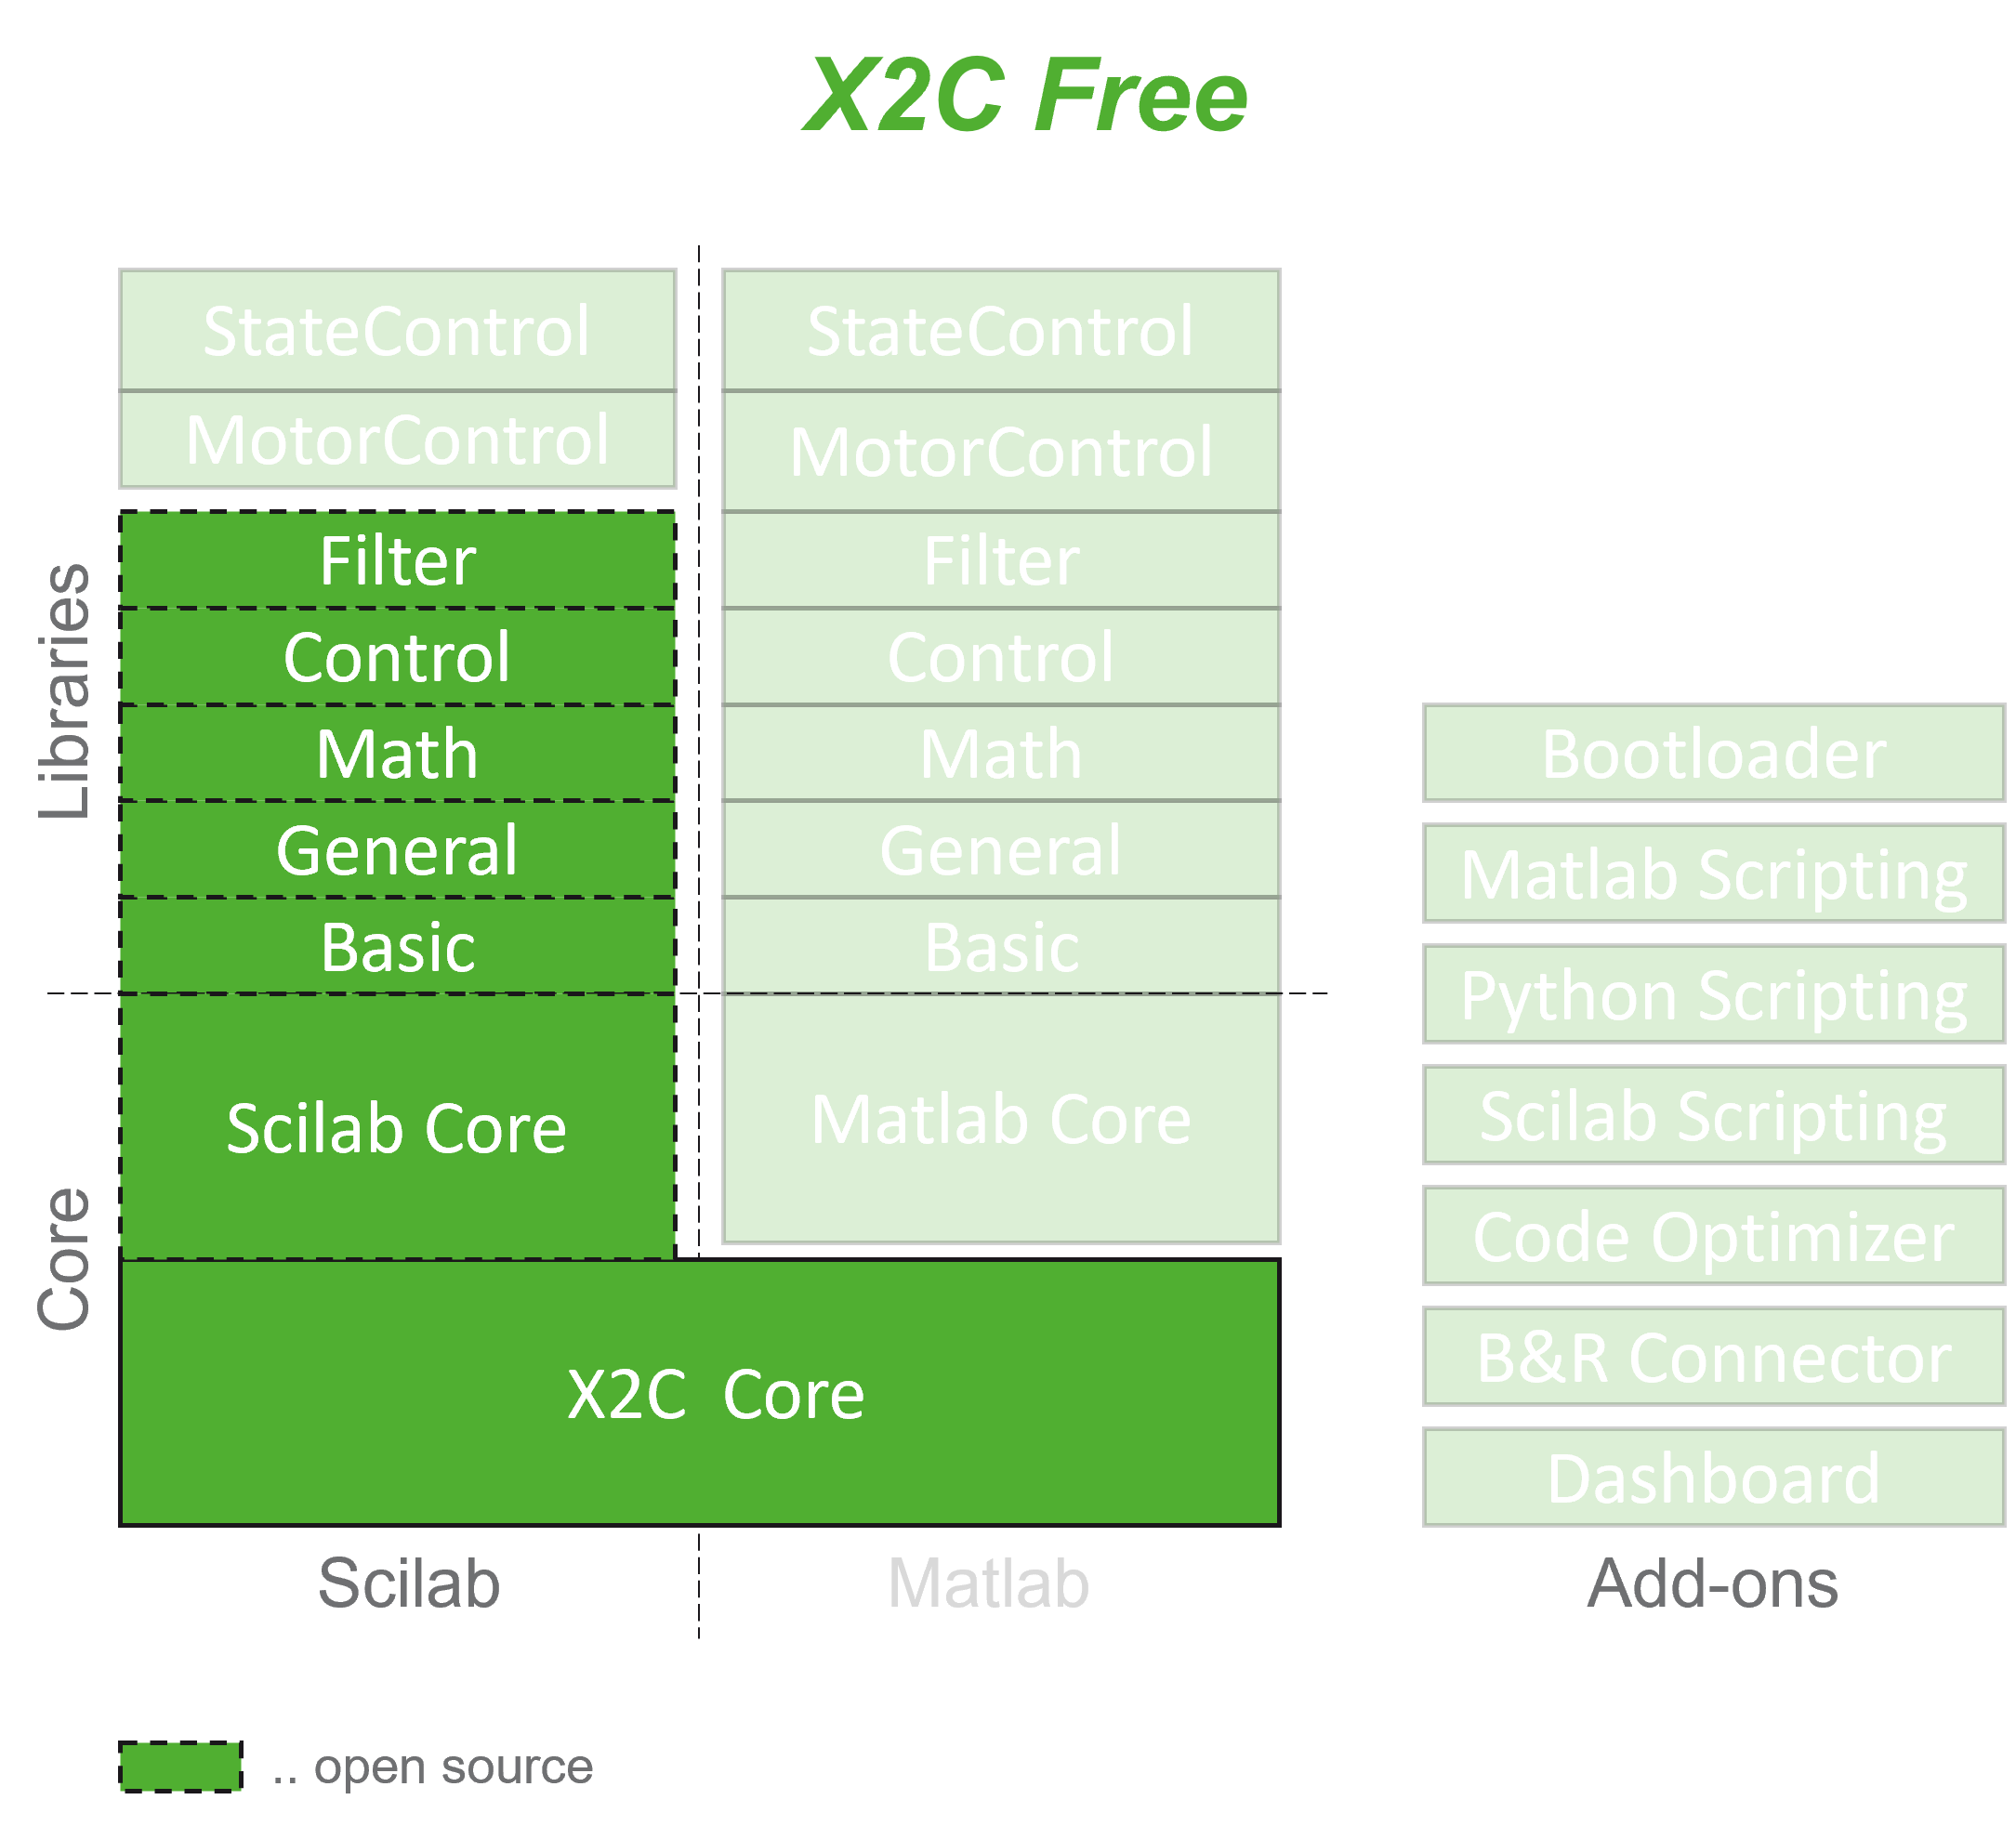 X2C Free content overview